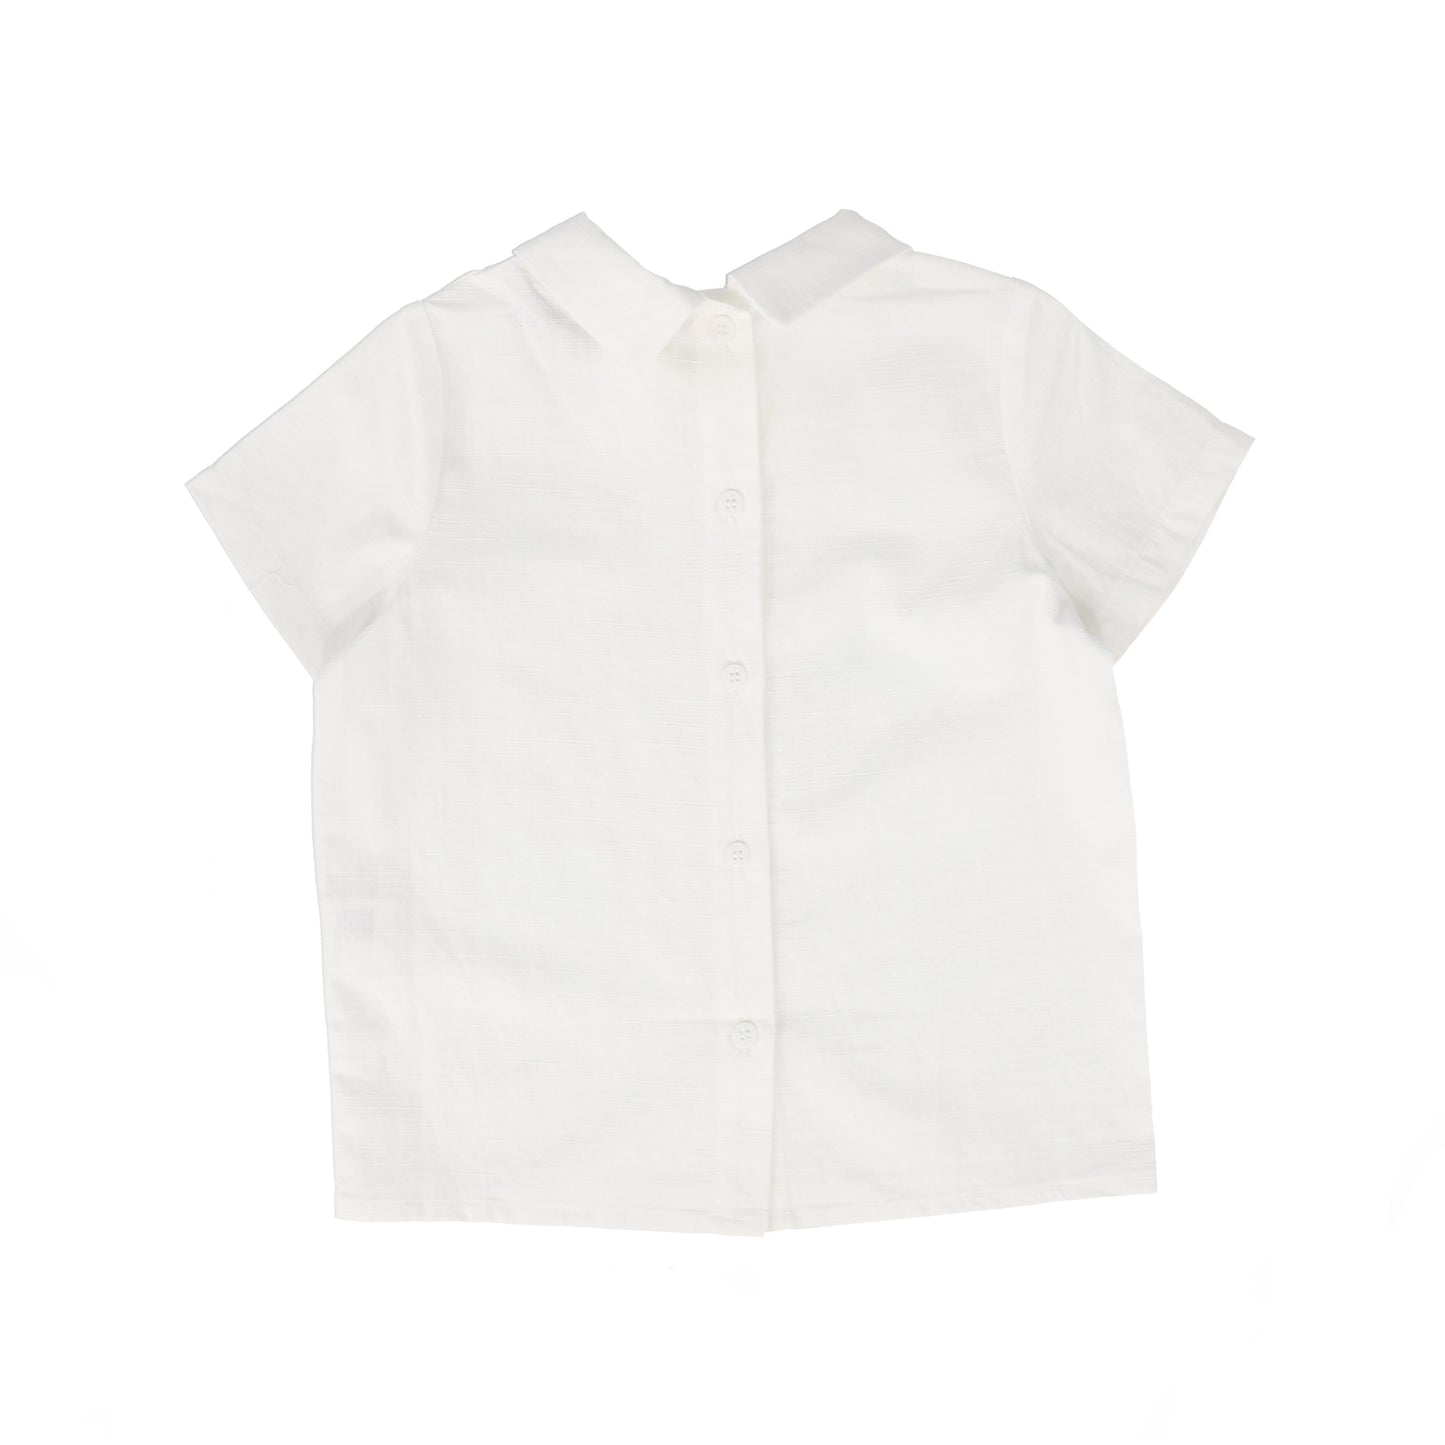 BACE COLLECTION WHITE COLLAR SHIRT [FINAL SALE]